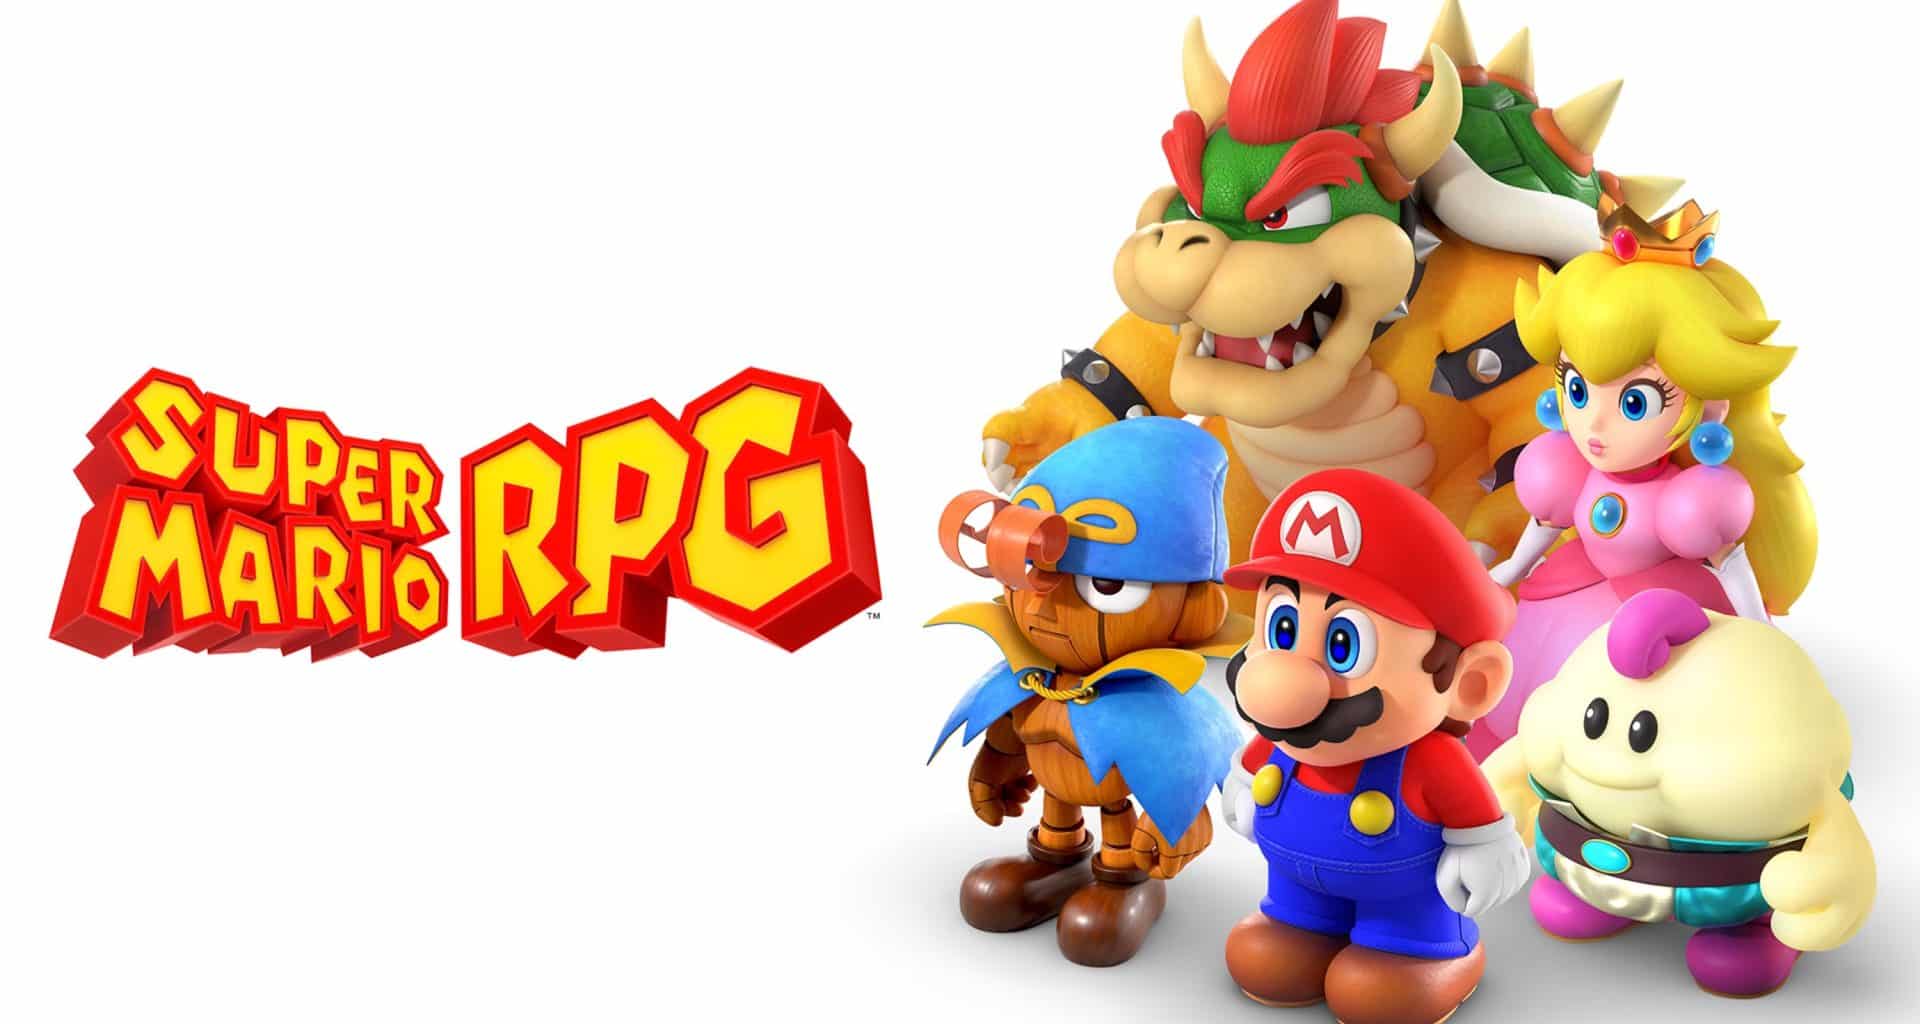 Super Mario RPG Comes to Switch on November 17 23423